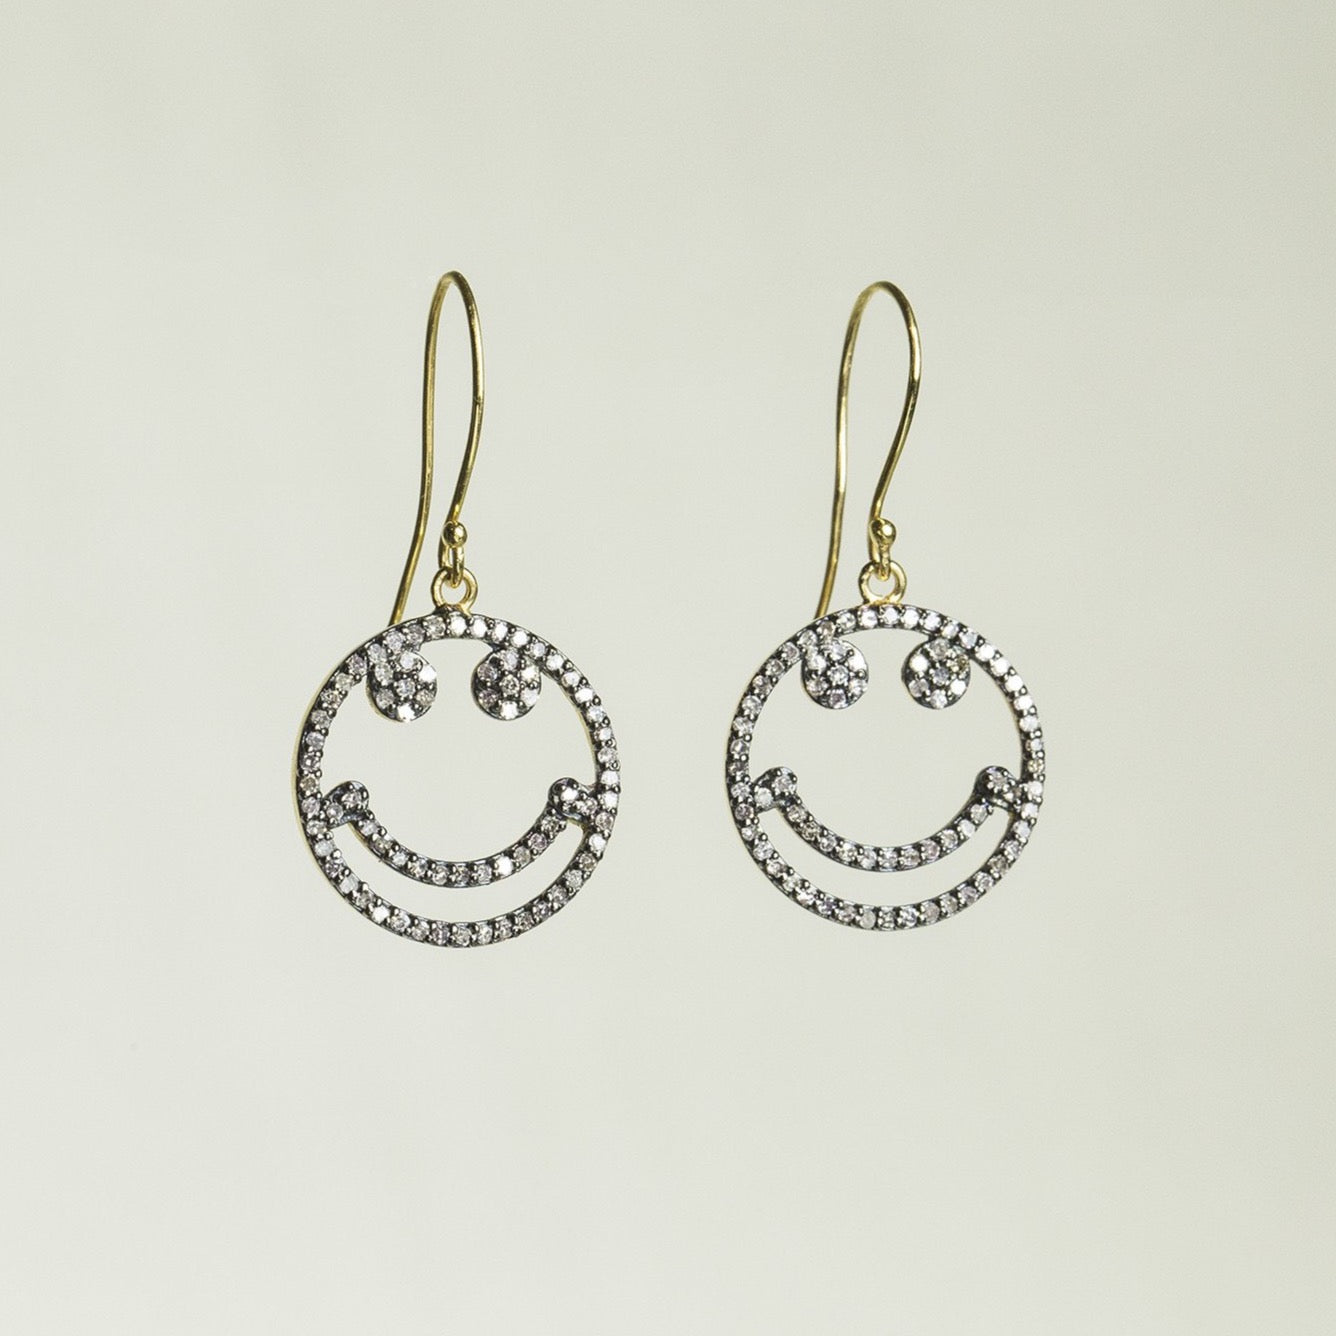 can't stop smiling earrings with real diamonds